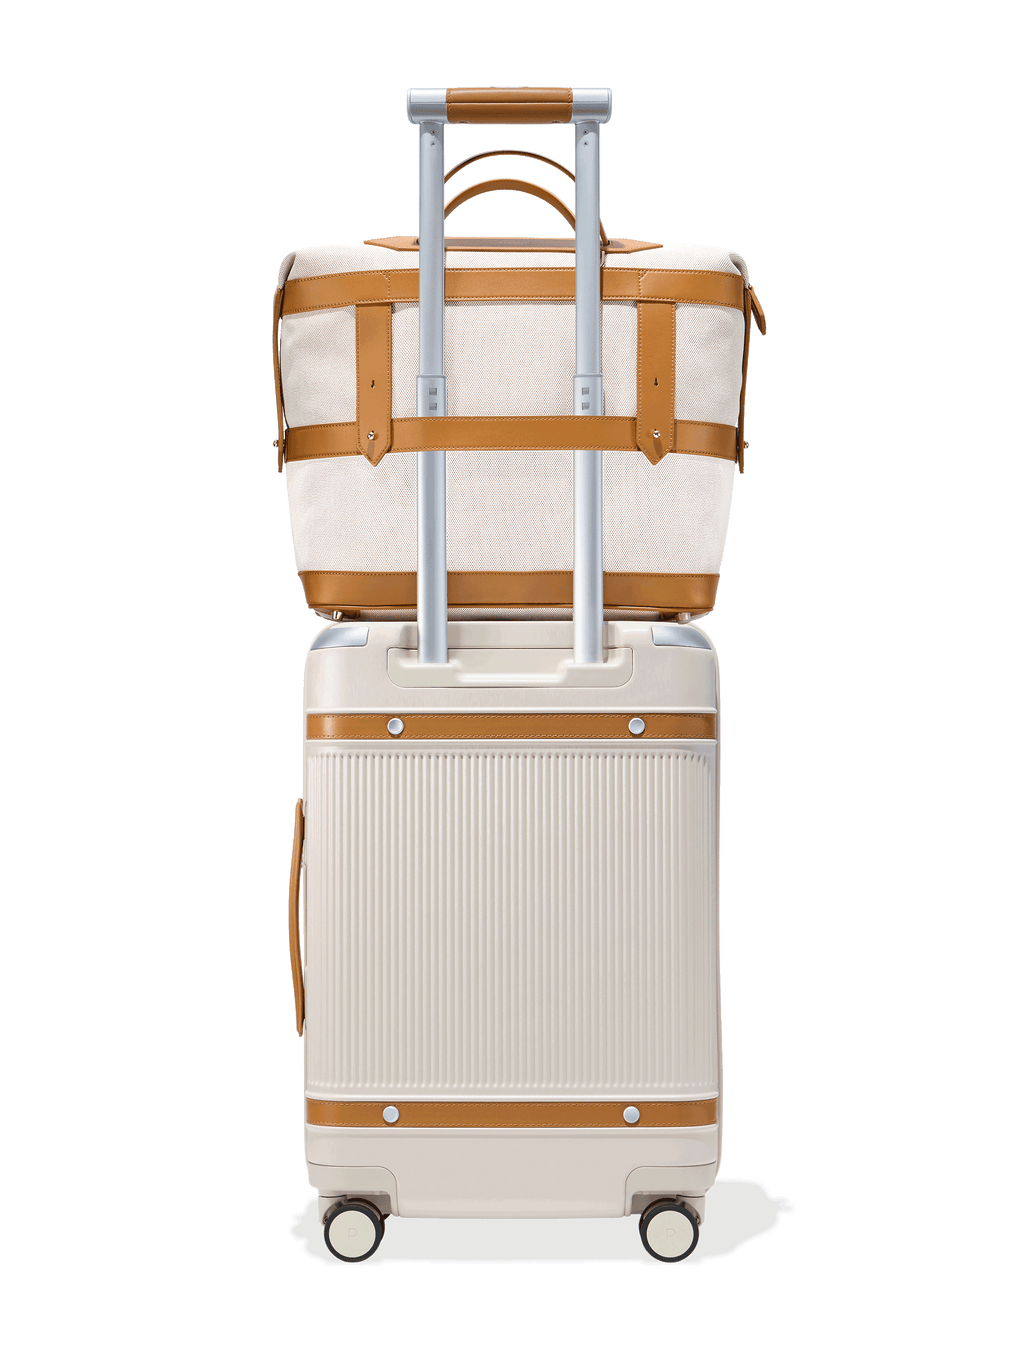 Hermes - The Orion Suitcase [Video]